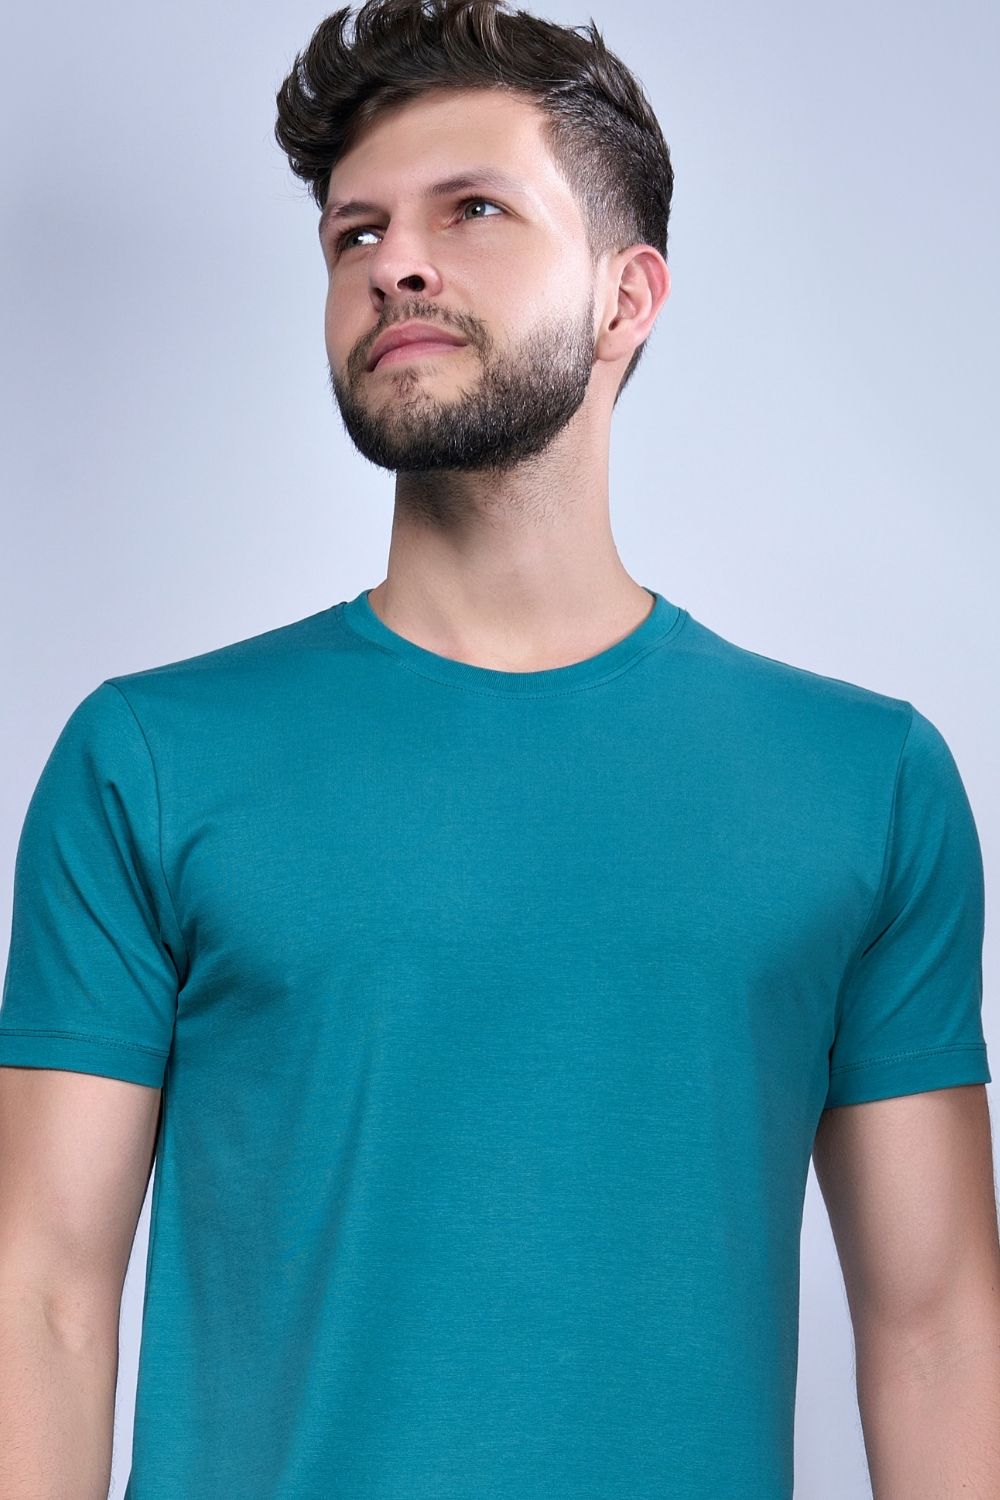 Cotton Stretch T shirt for men in the the solid color British Green with half sleeves and round neck, front view.